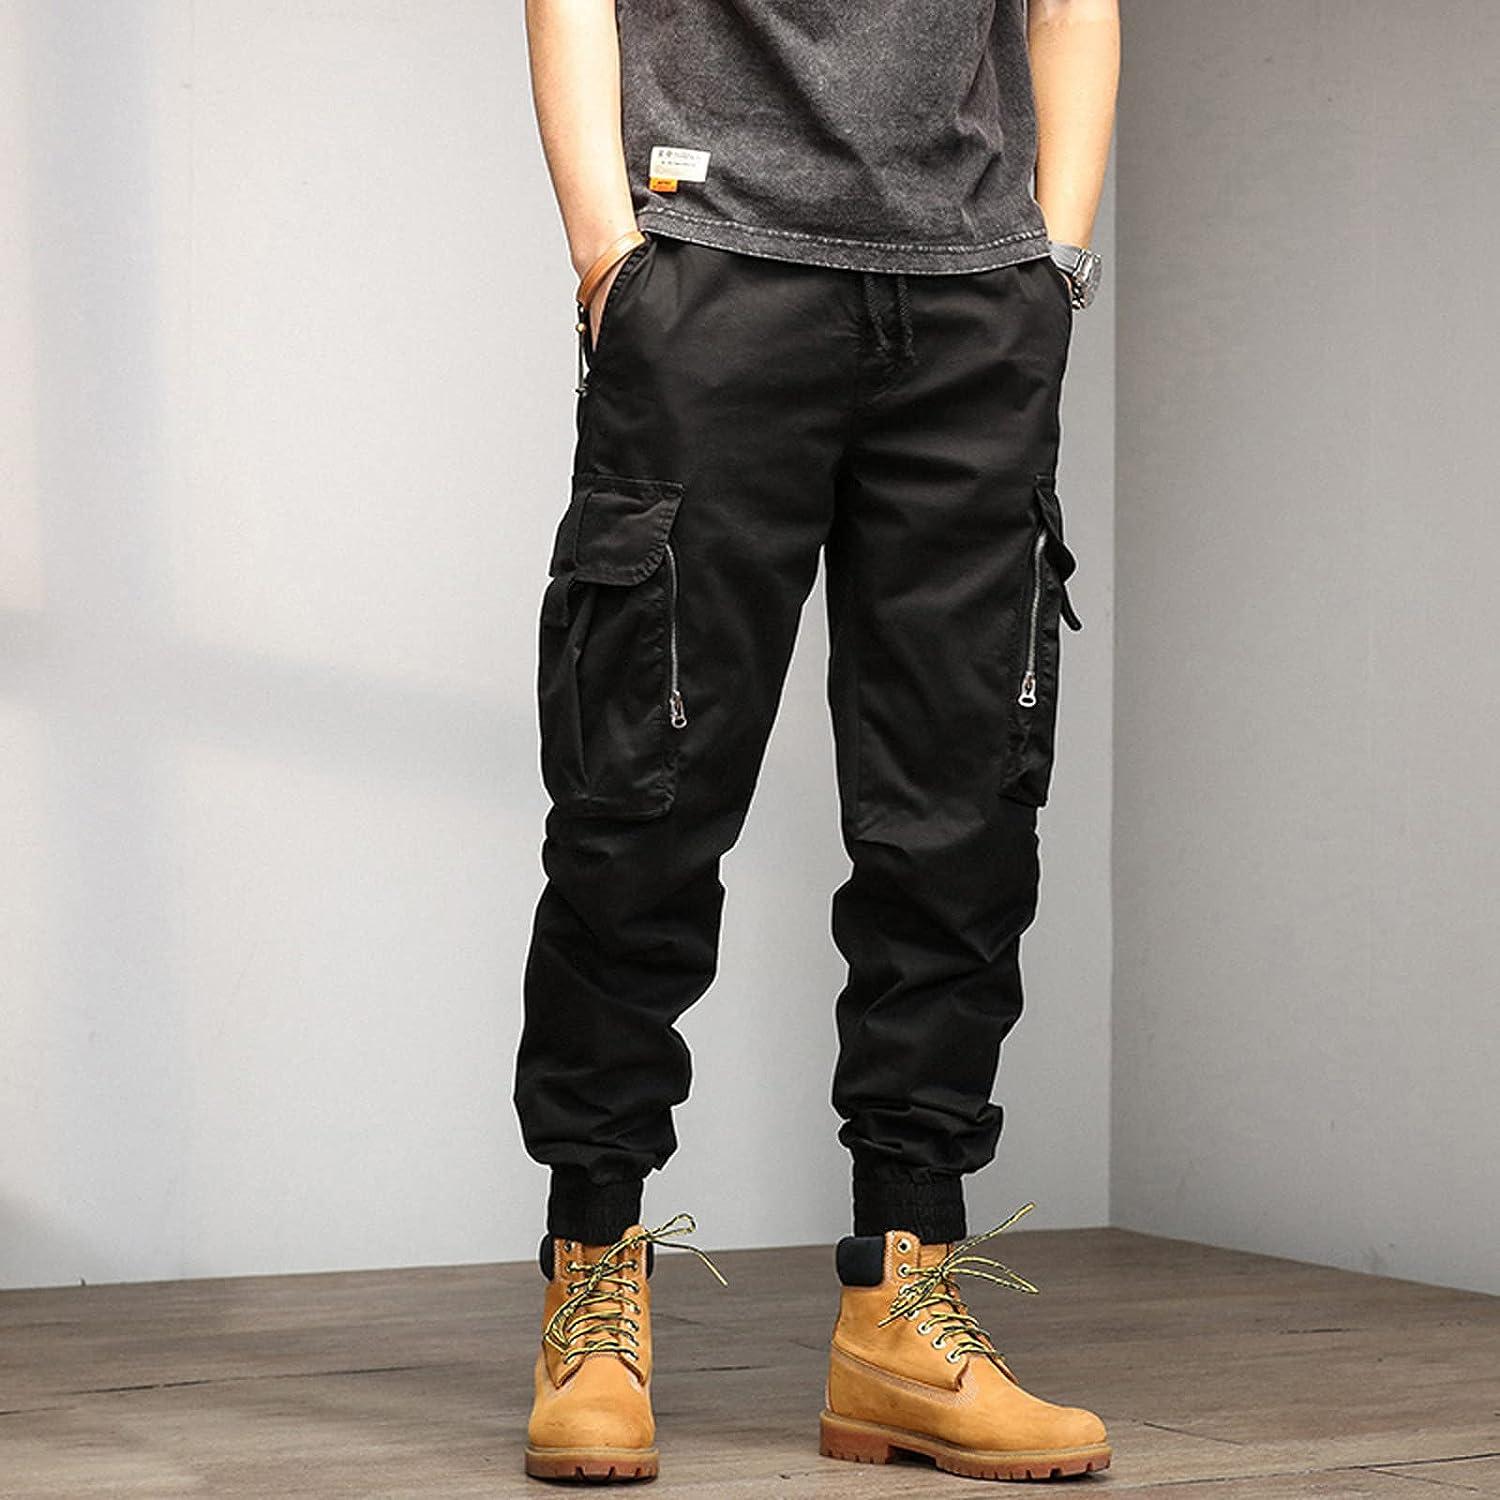 Men's Drawstring Cargo Pants Athletic-Fit 6 Pockets Casual Work Joggers  Sweatpants Lightweight Outdoor Trousers